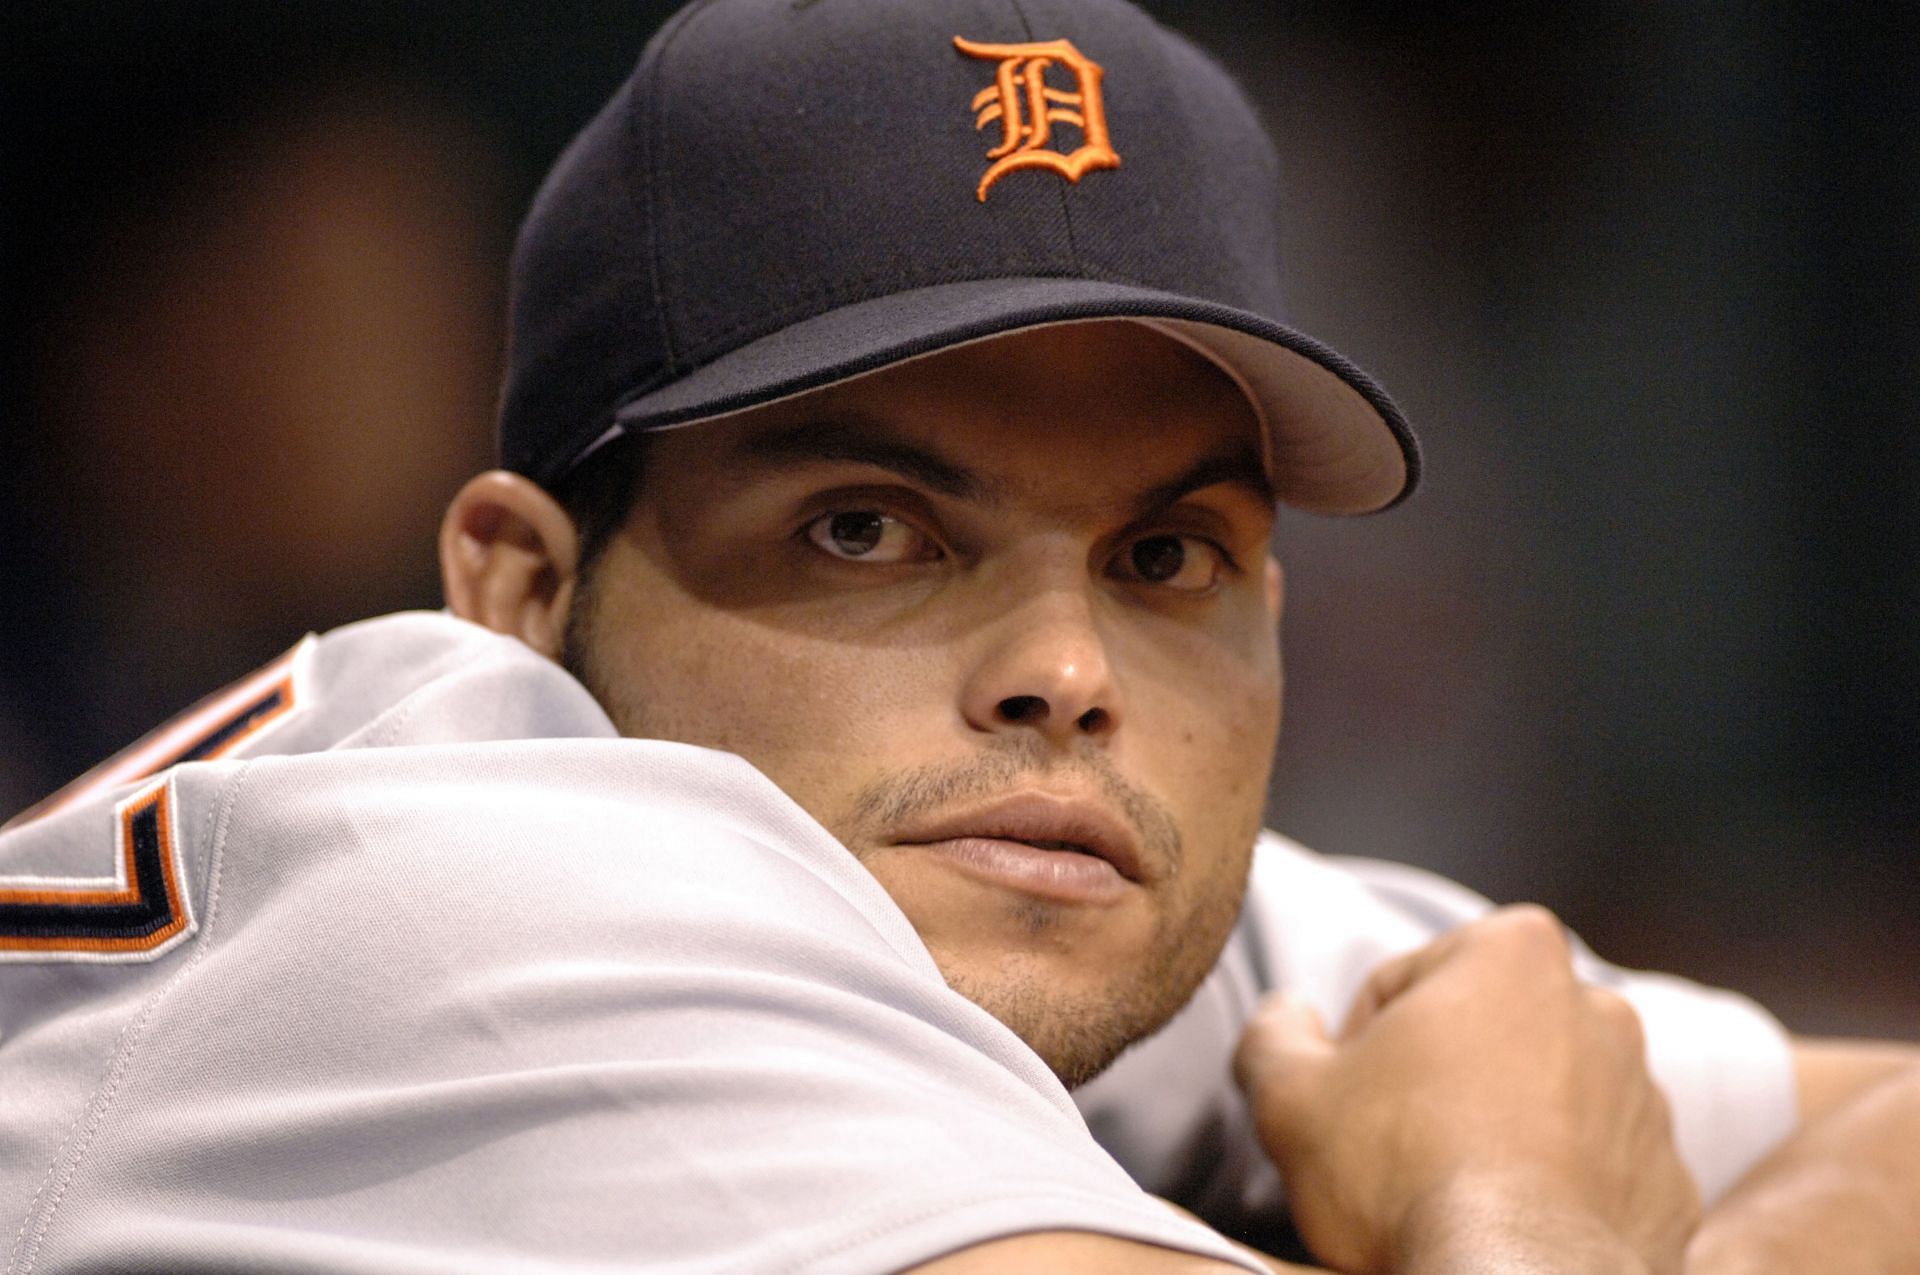 Ivan Rodriguez- The Hall Of Famer